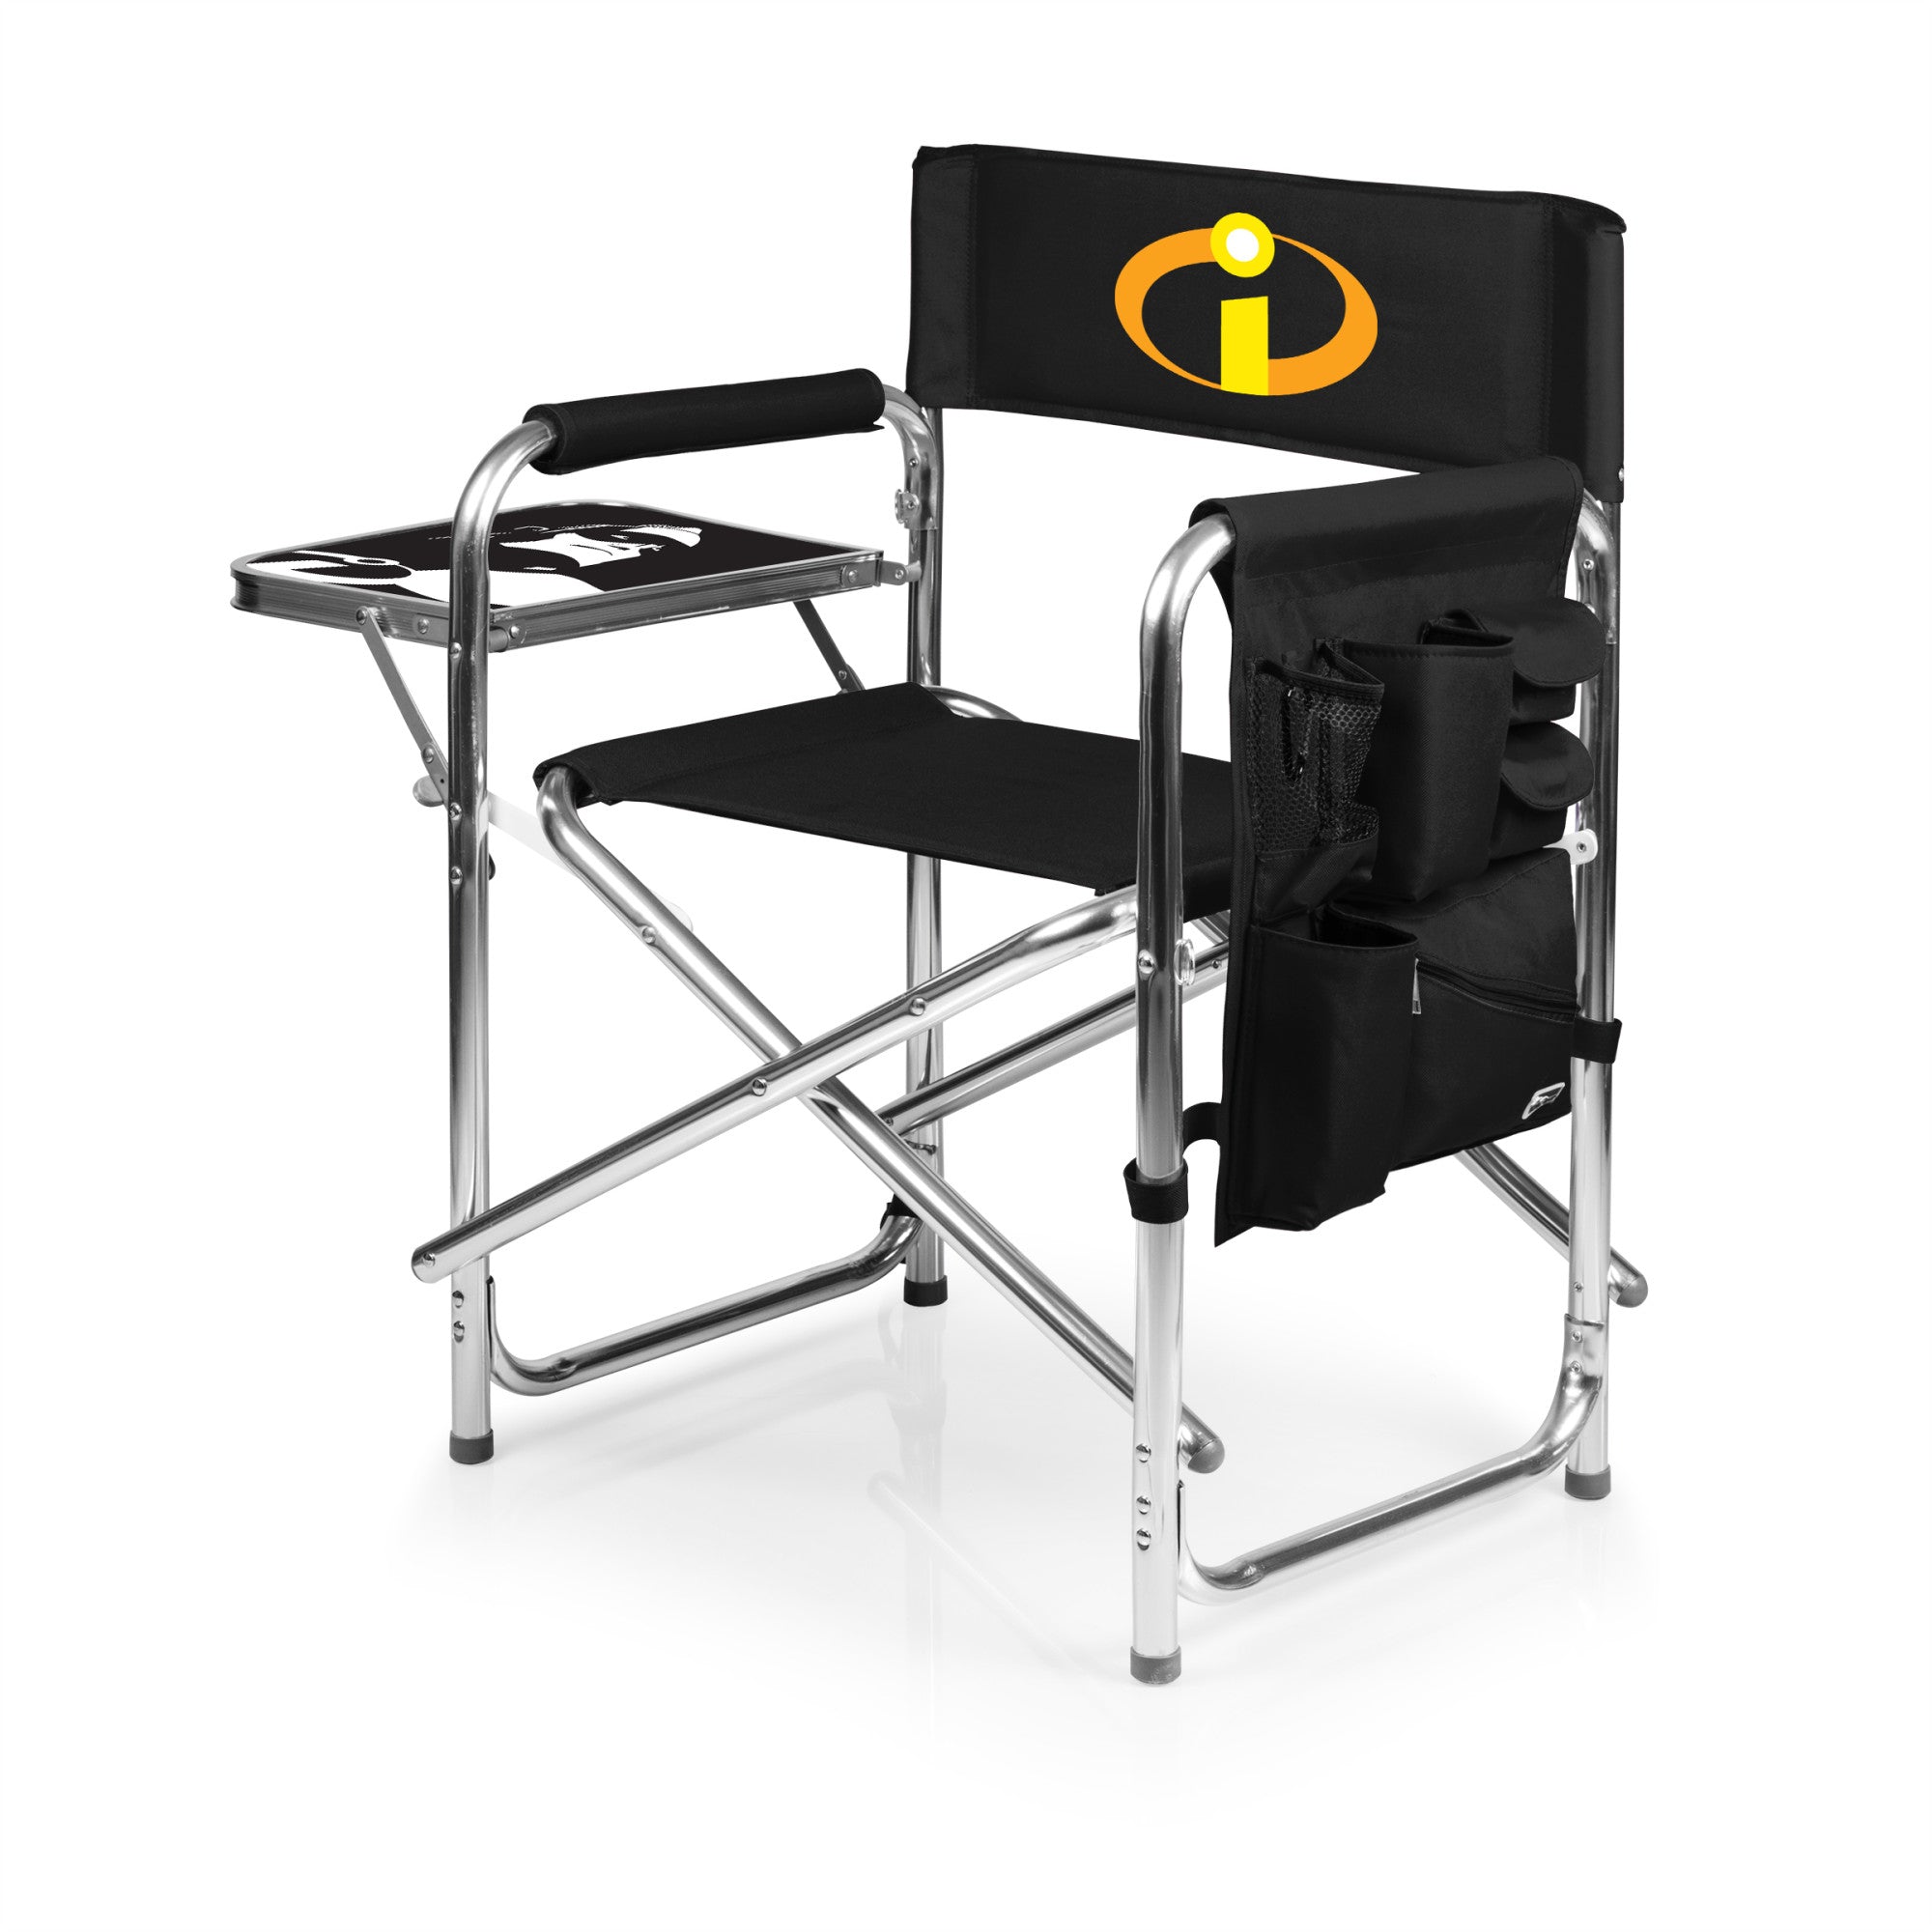 Mr. Incredible - The Incredibles - Sports Chair